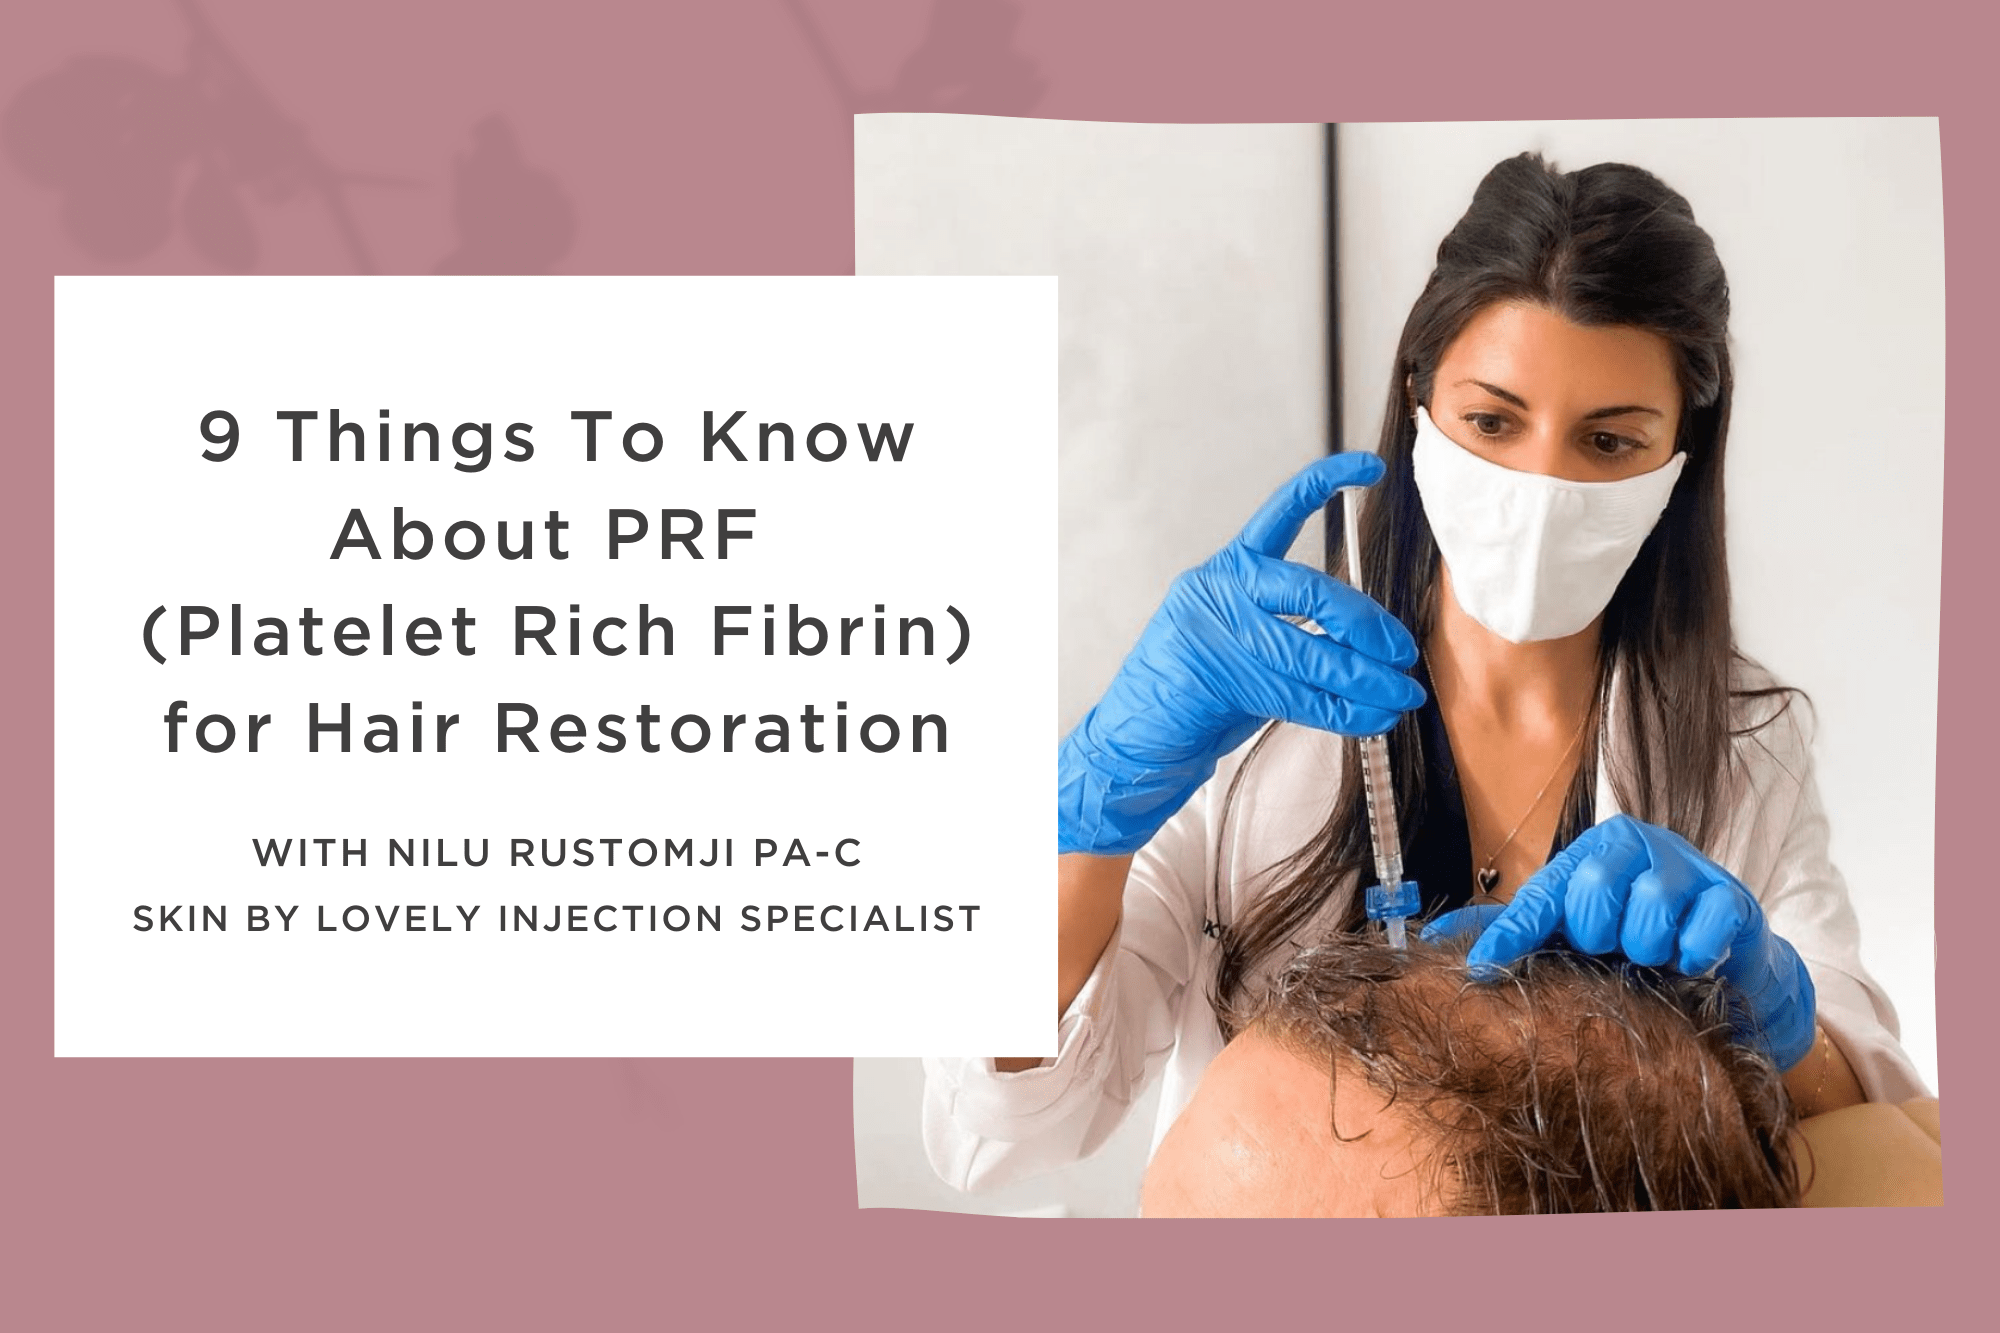 9 Things To Know About PRF (Platelet Rich Fibrin) for Hair Restoration with  Nilu Rustomji PA-C - Skin by Lovely